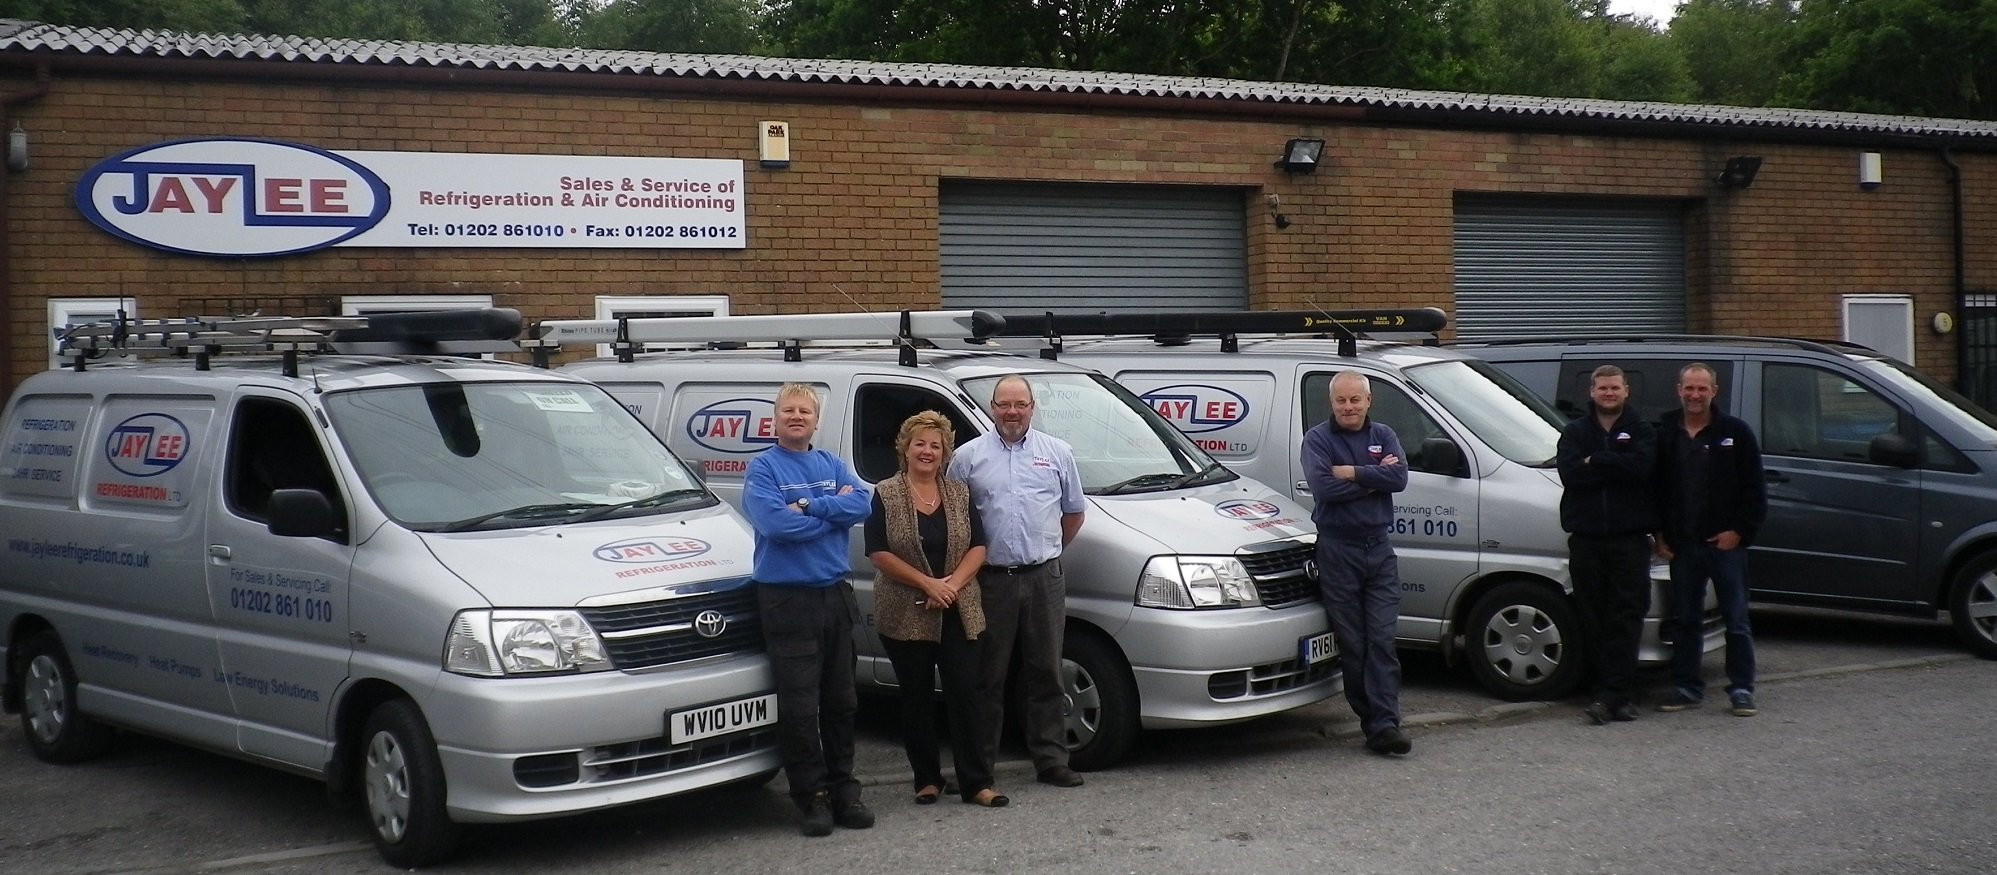 Air Conditioning Specialists in Dorset, Jaylee Refrigeration